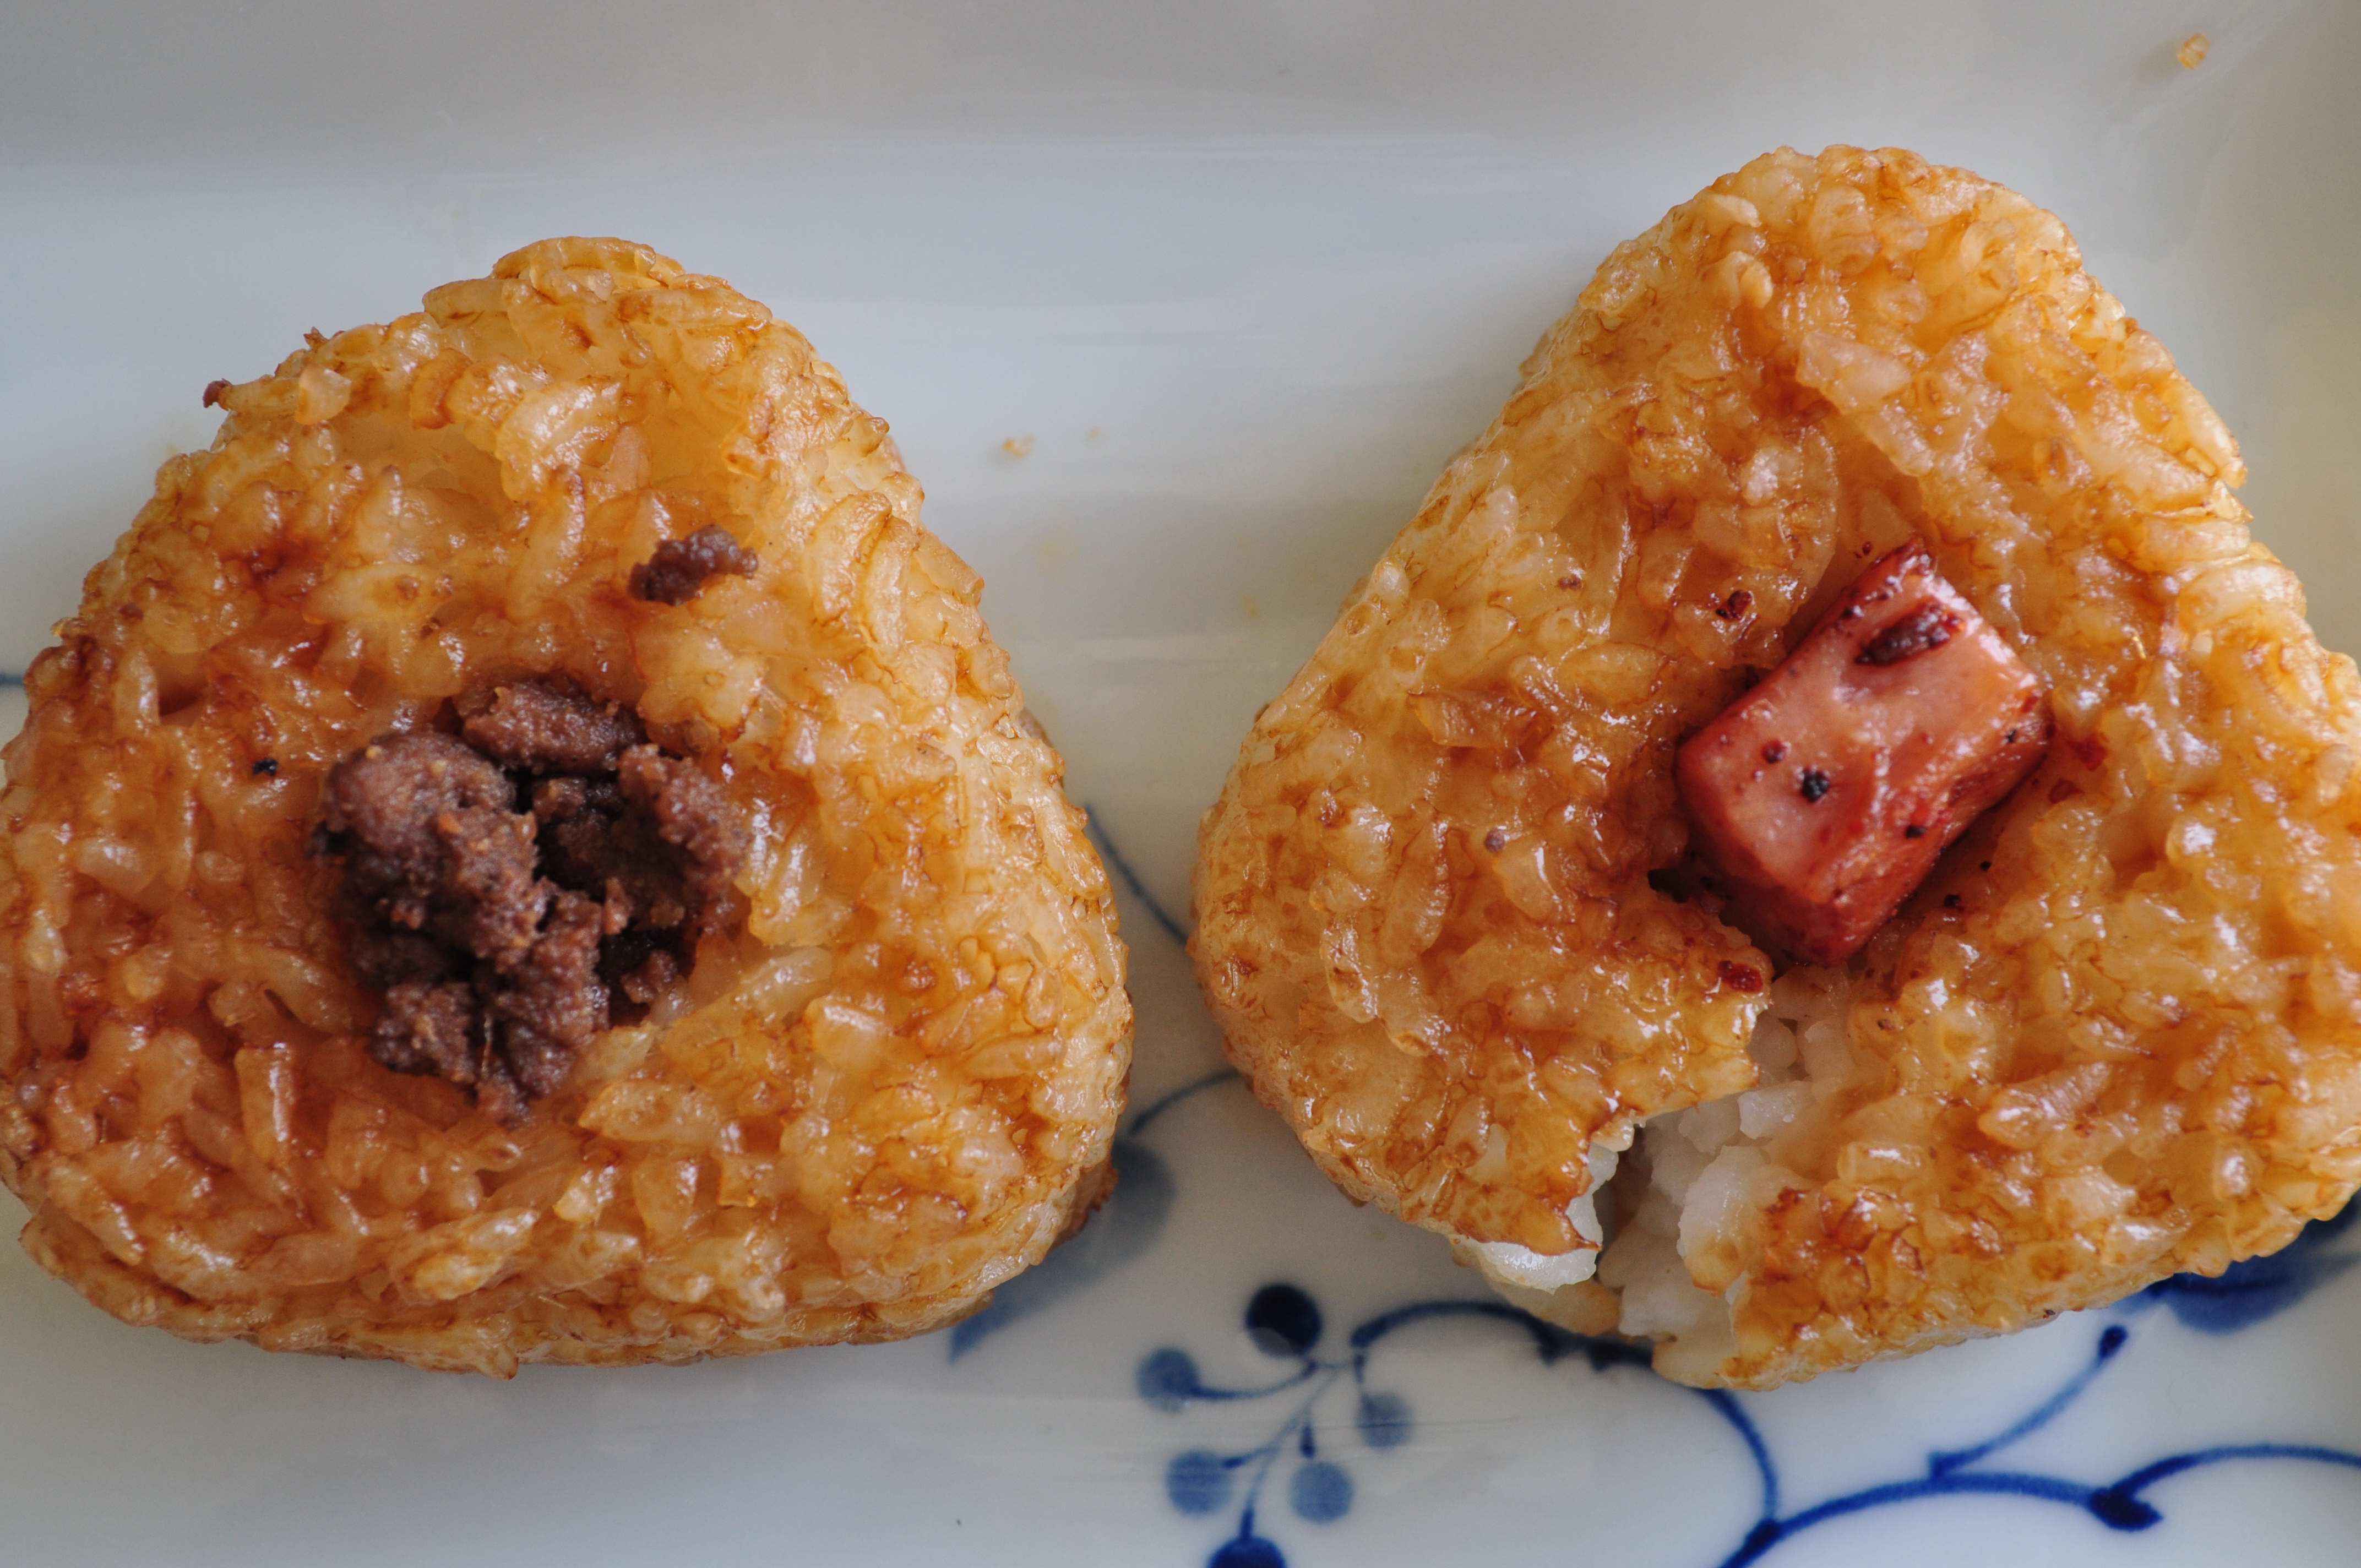 Joomukbap with ground beef(left) and spam(right)